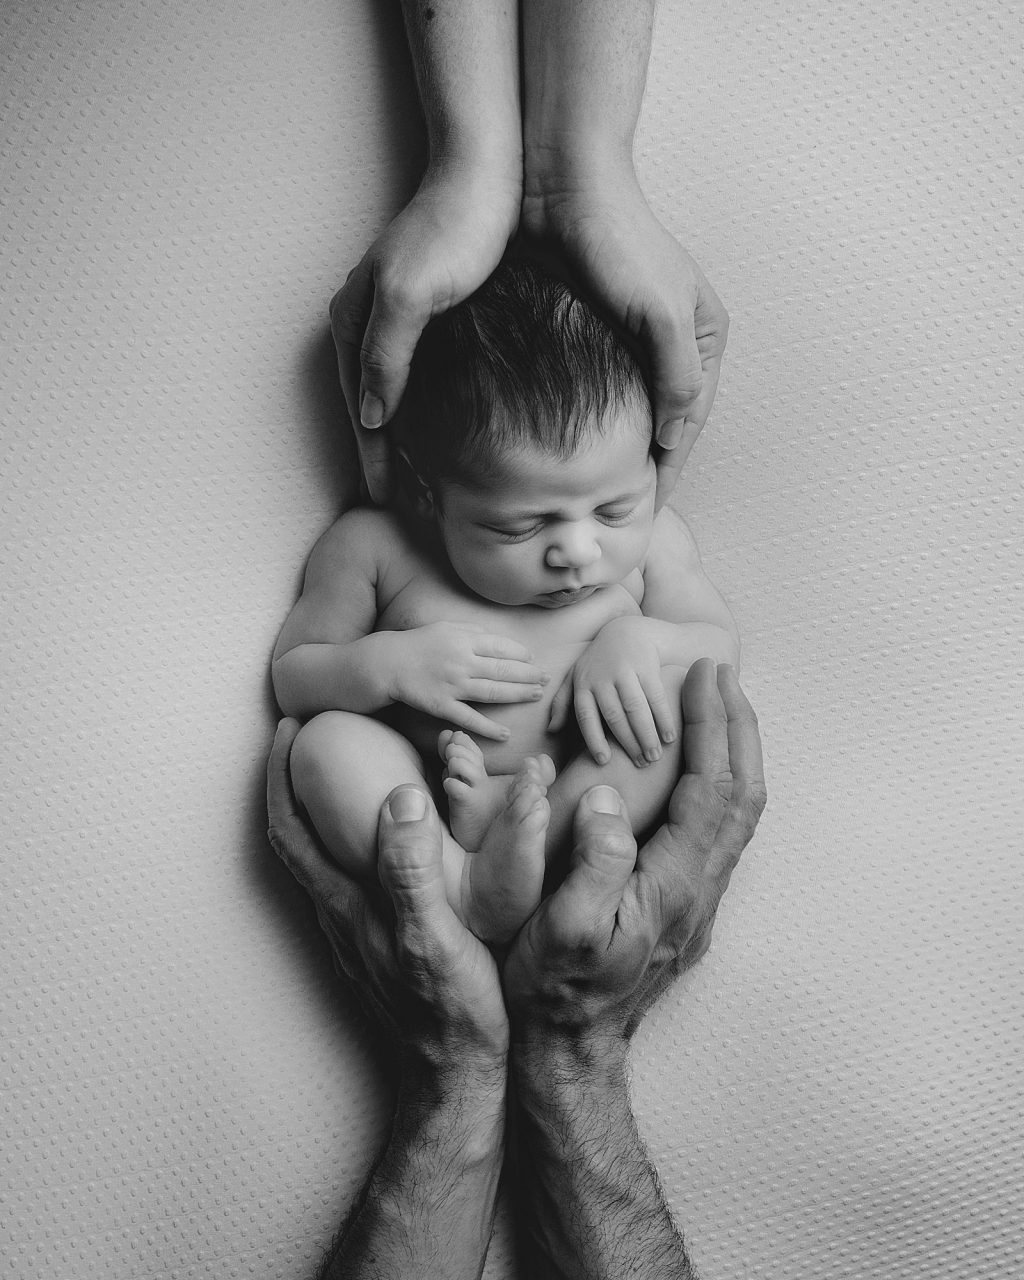 black and white image of a newborn baby on soft cushion with a pair of male hand cupping them from below and female hands cupping them from above